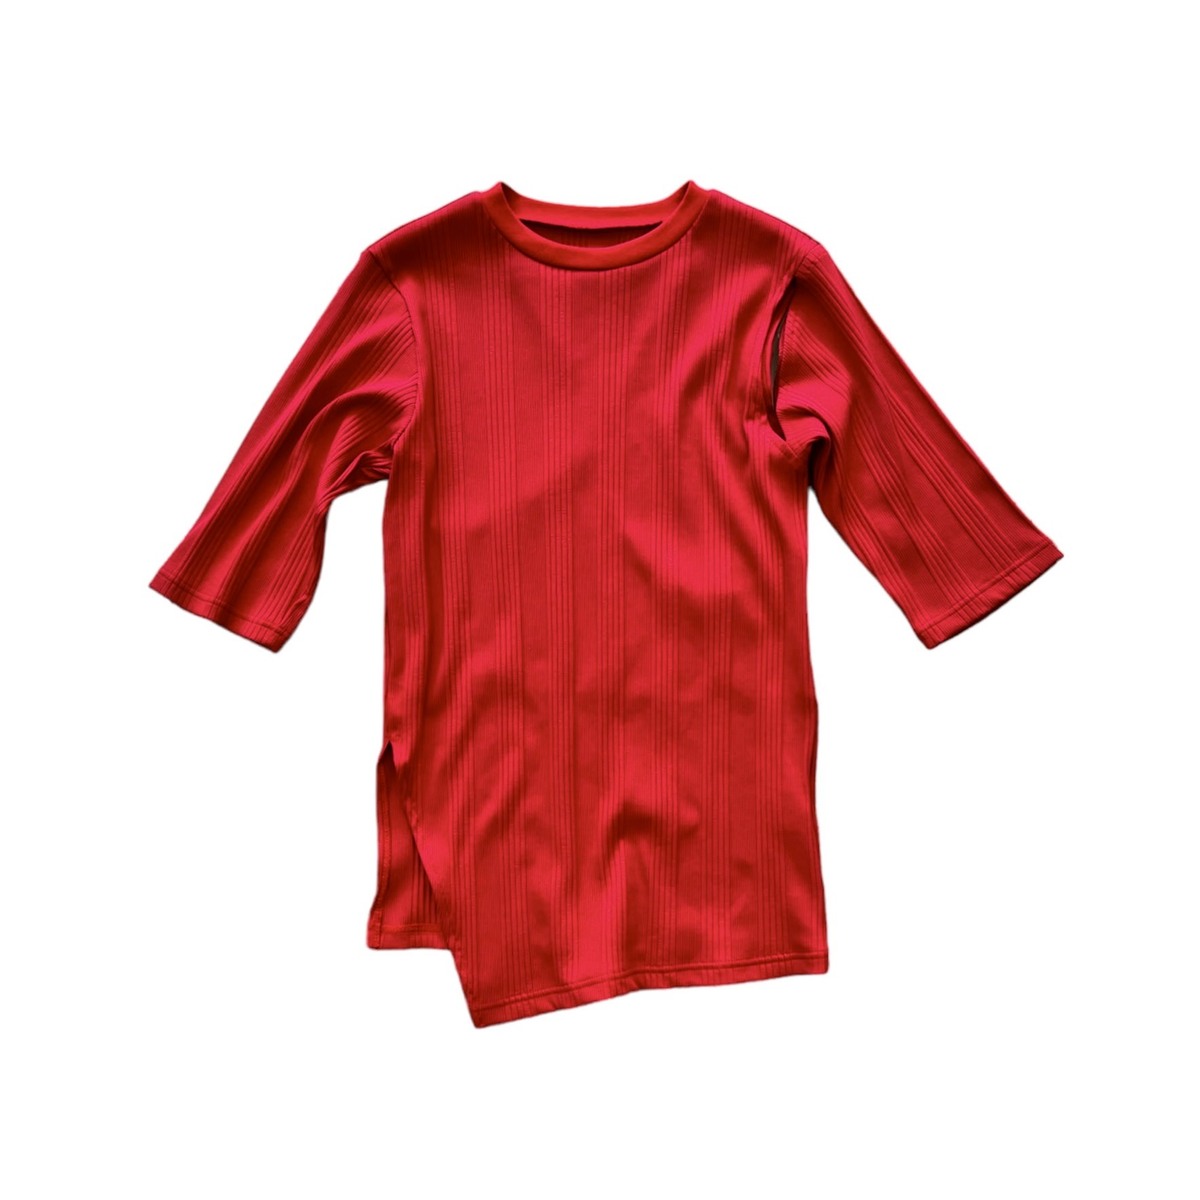 k3 Tee cut out -red 1